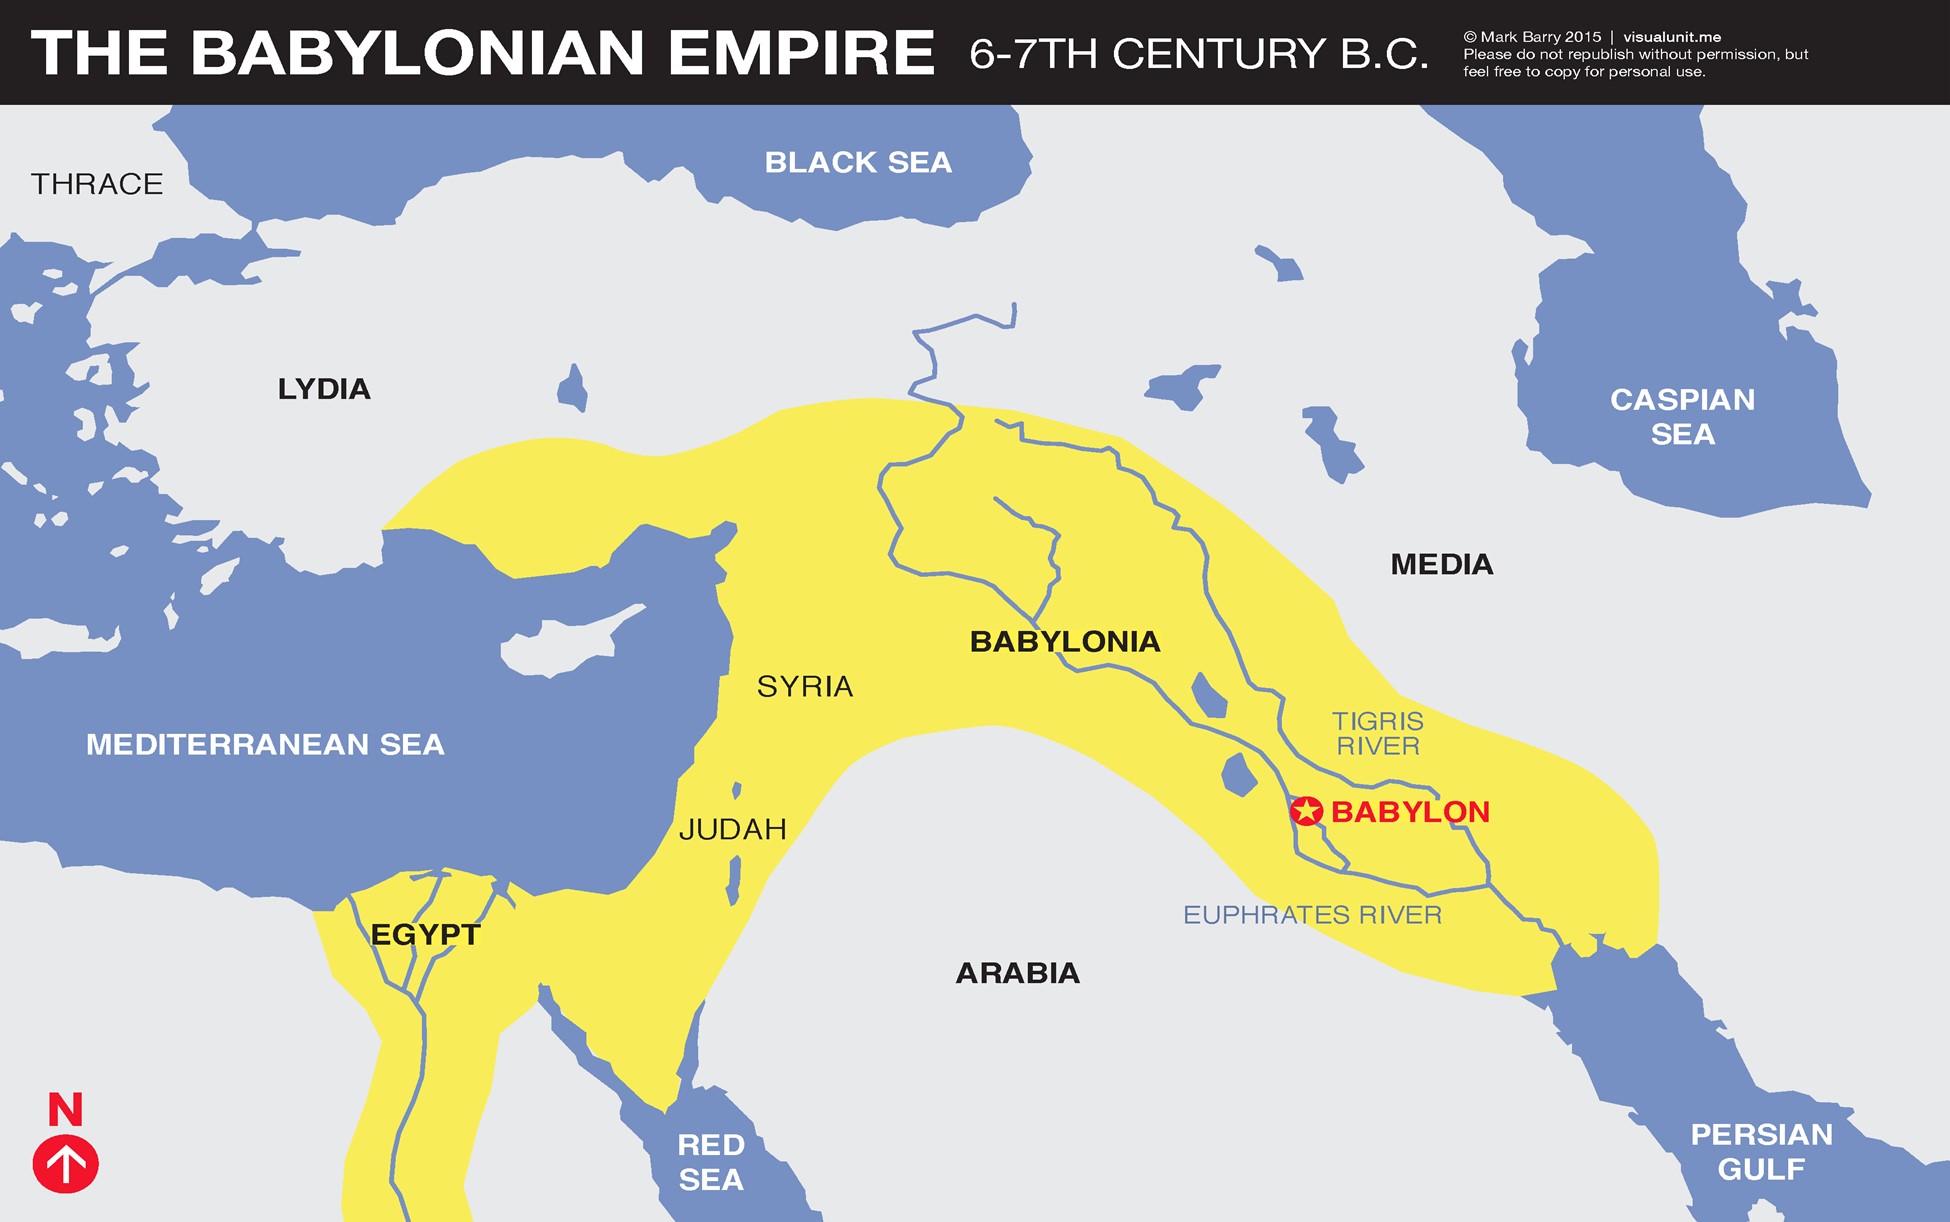 Map of the Babylonian Empire